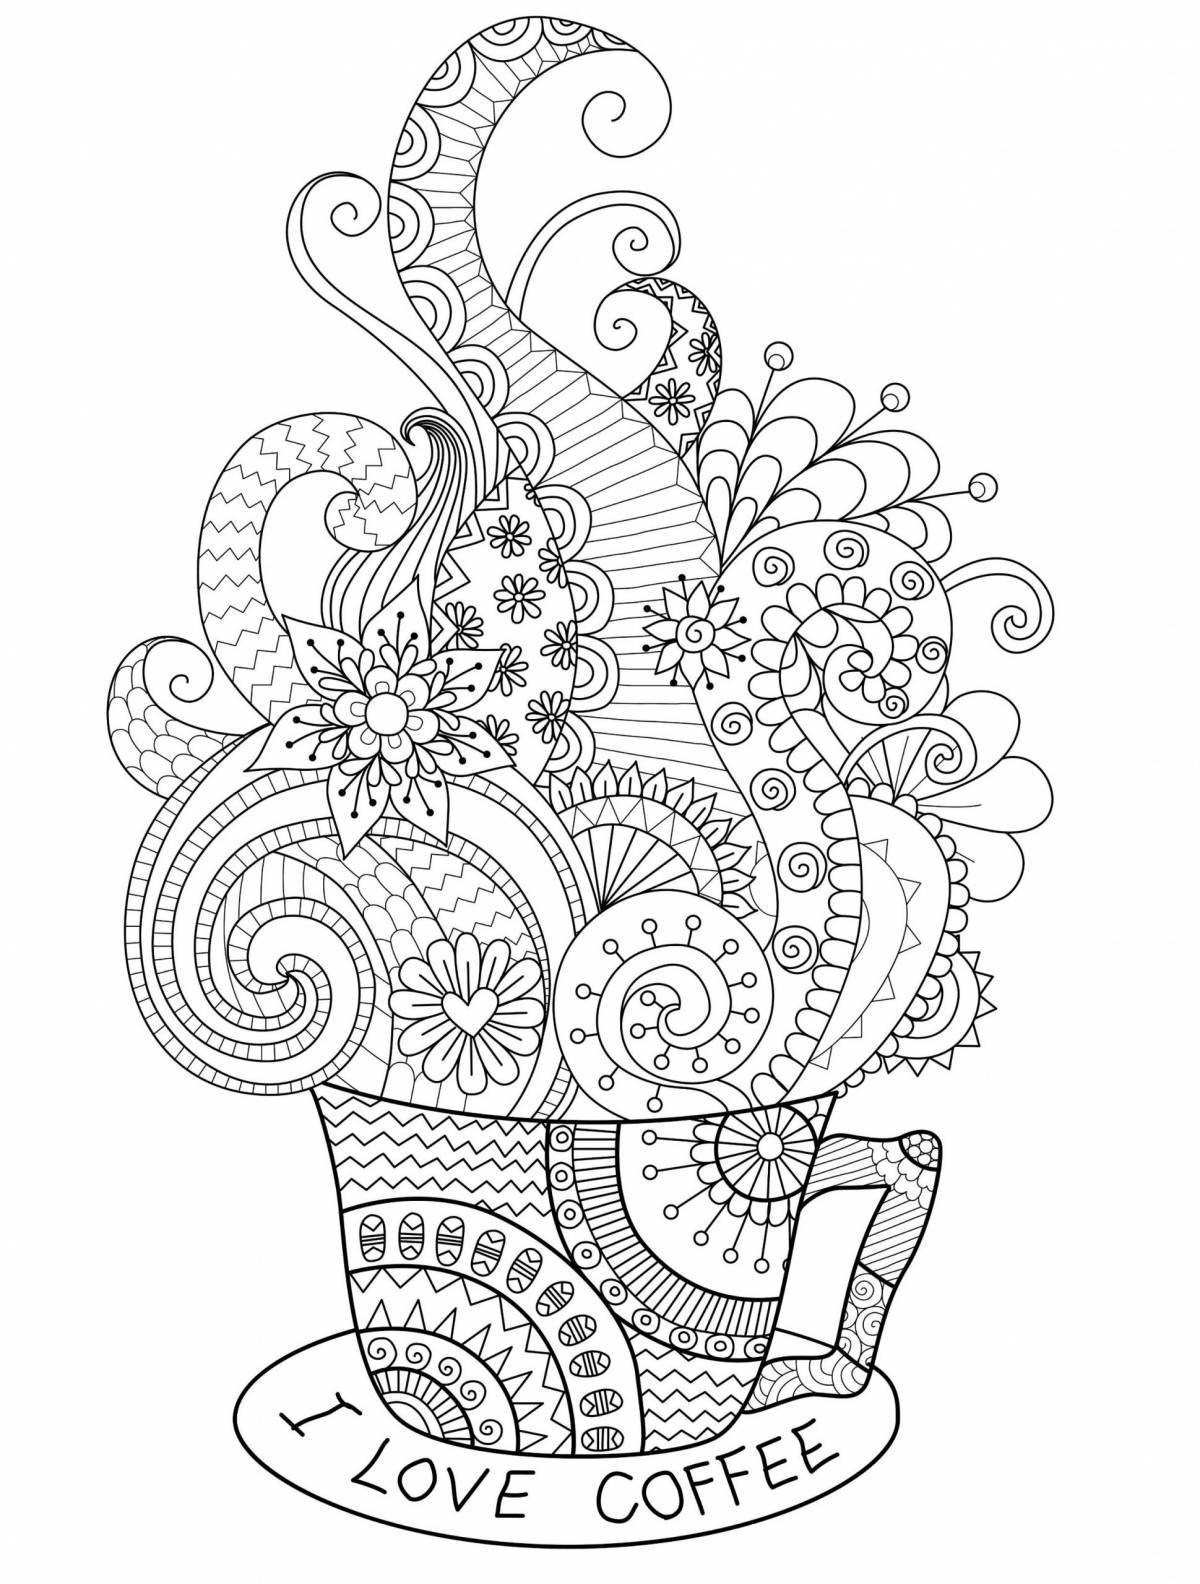 Peaceful coloring hygge